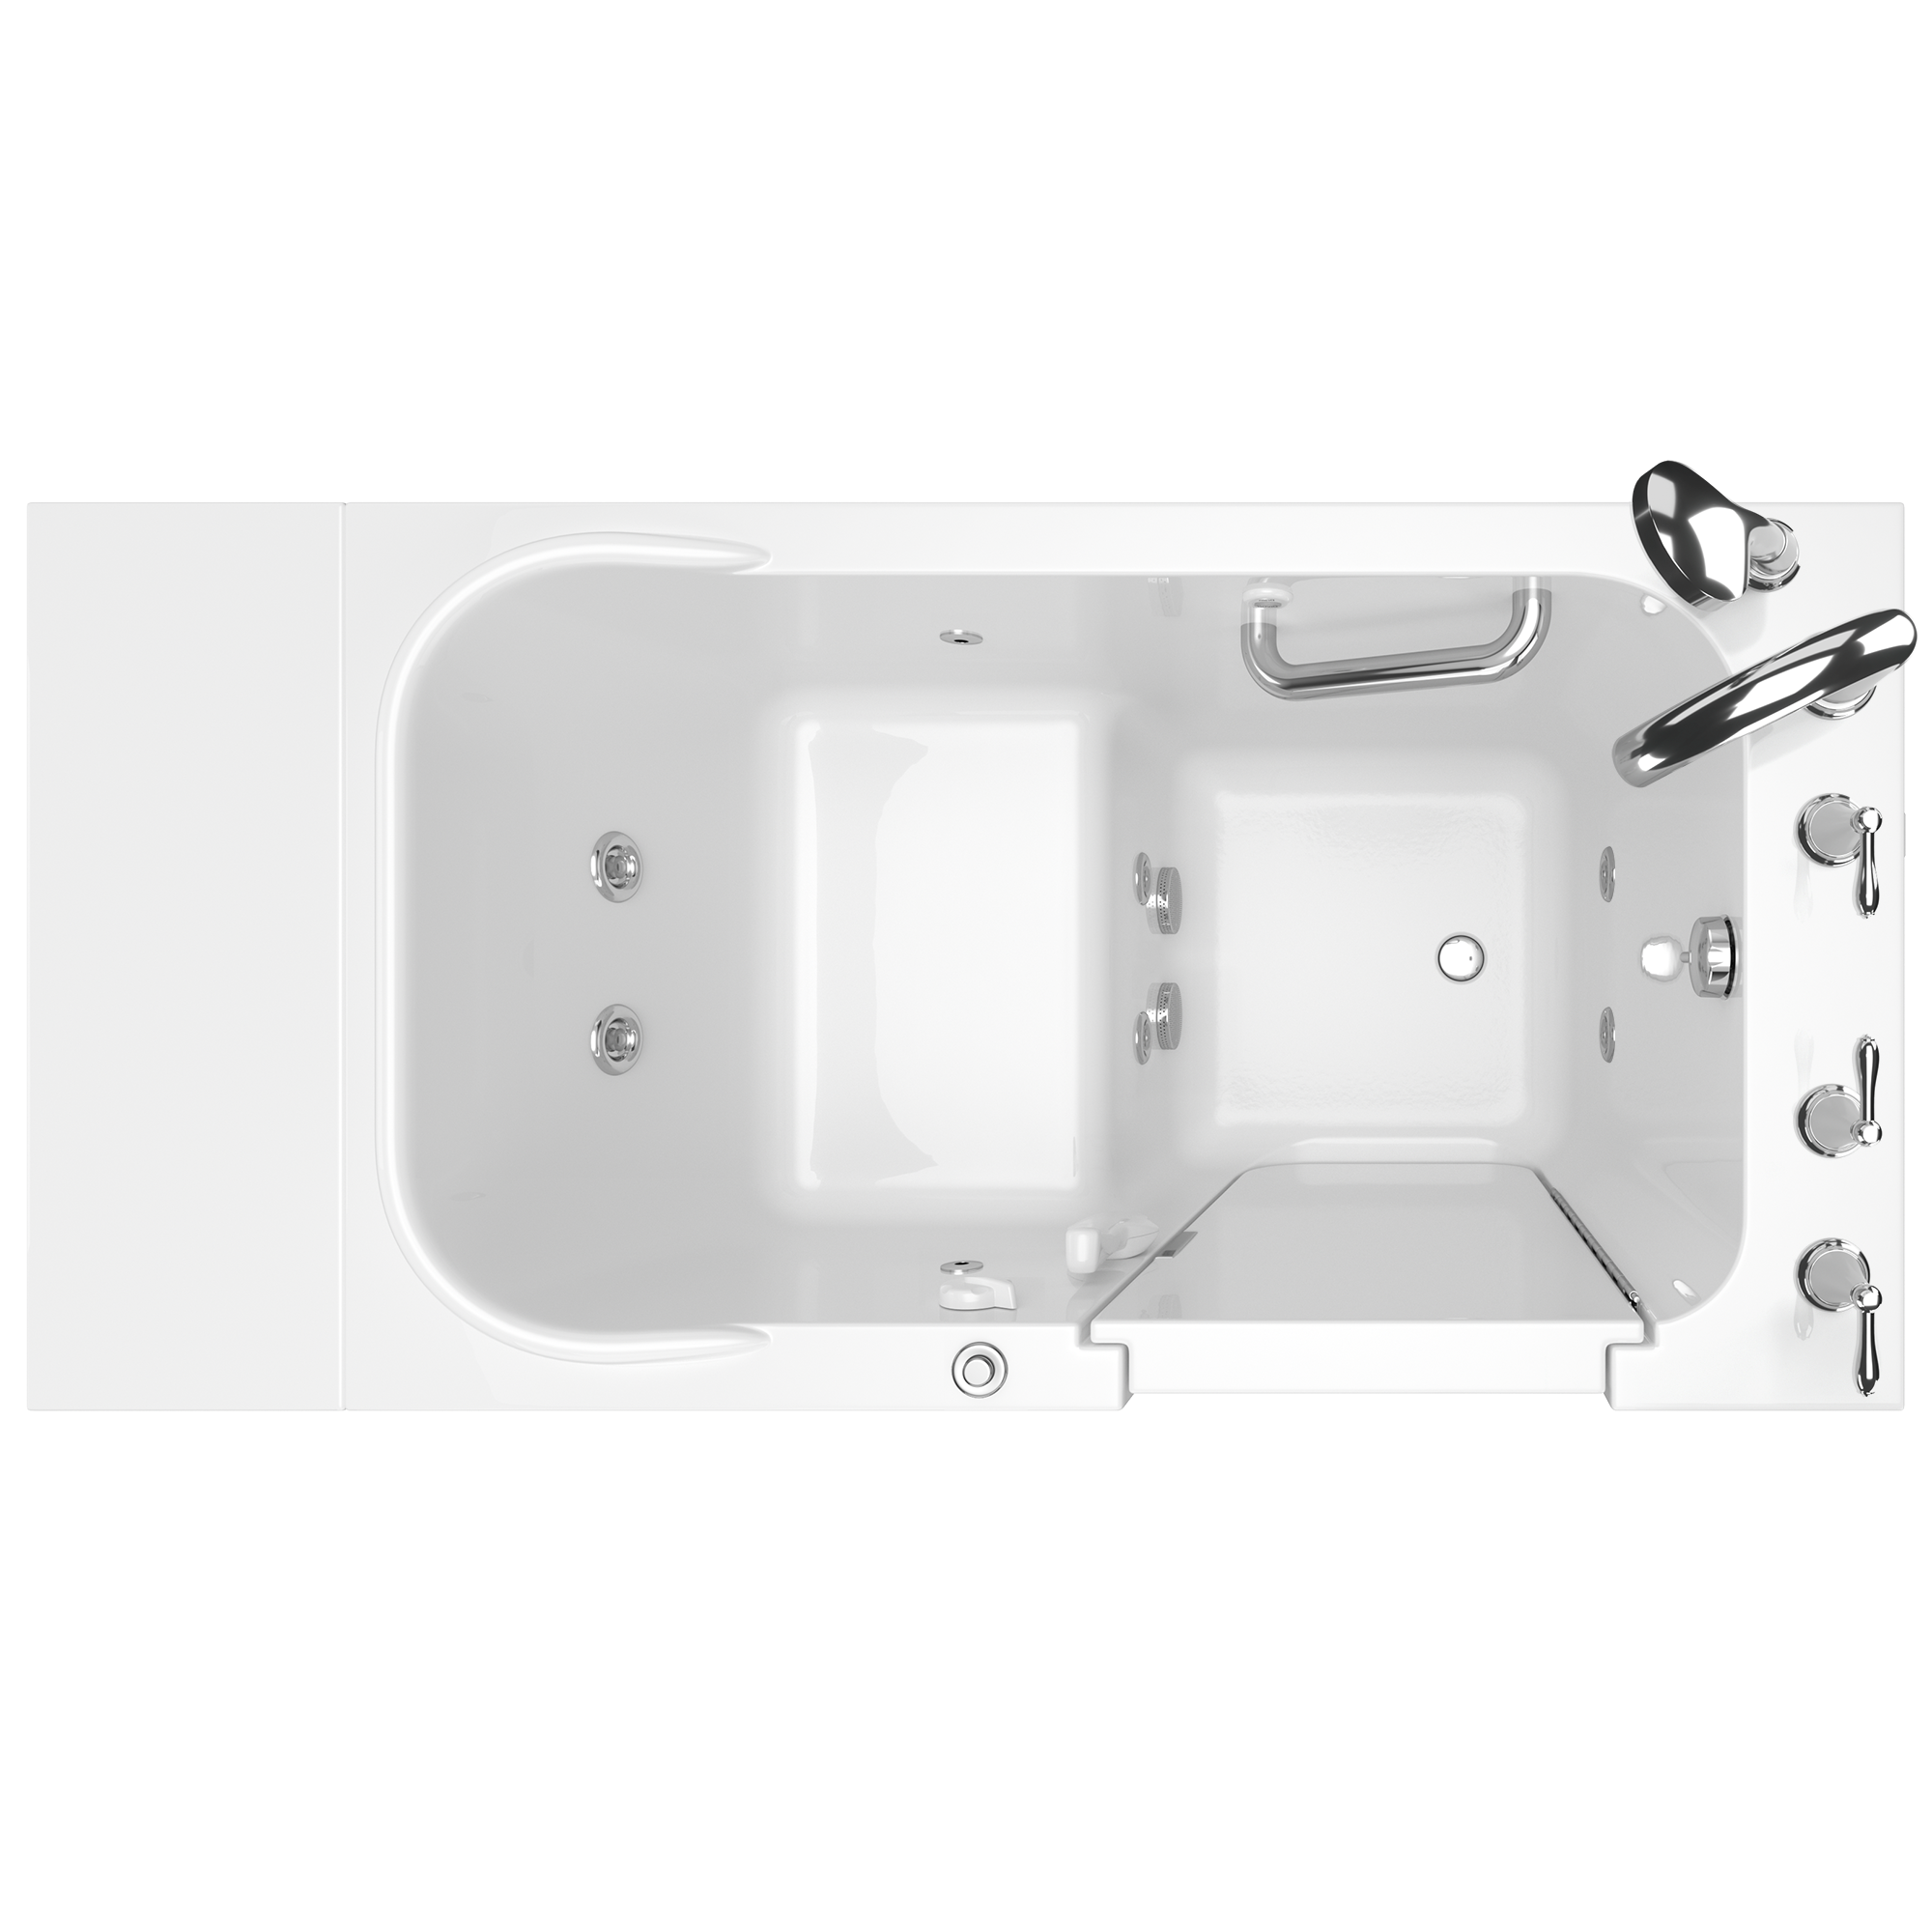 Gelcoat Value Series 28x48-inch Walk-in Bathtub with Whirlpool System  Right Hand Door and Drain